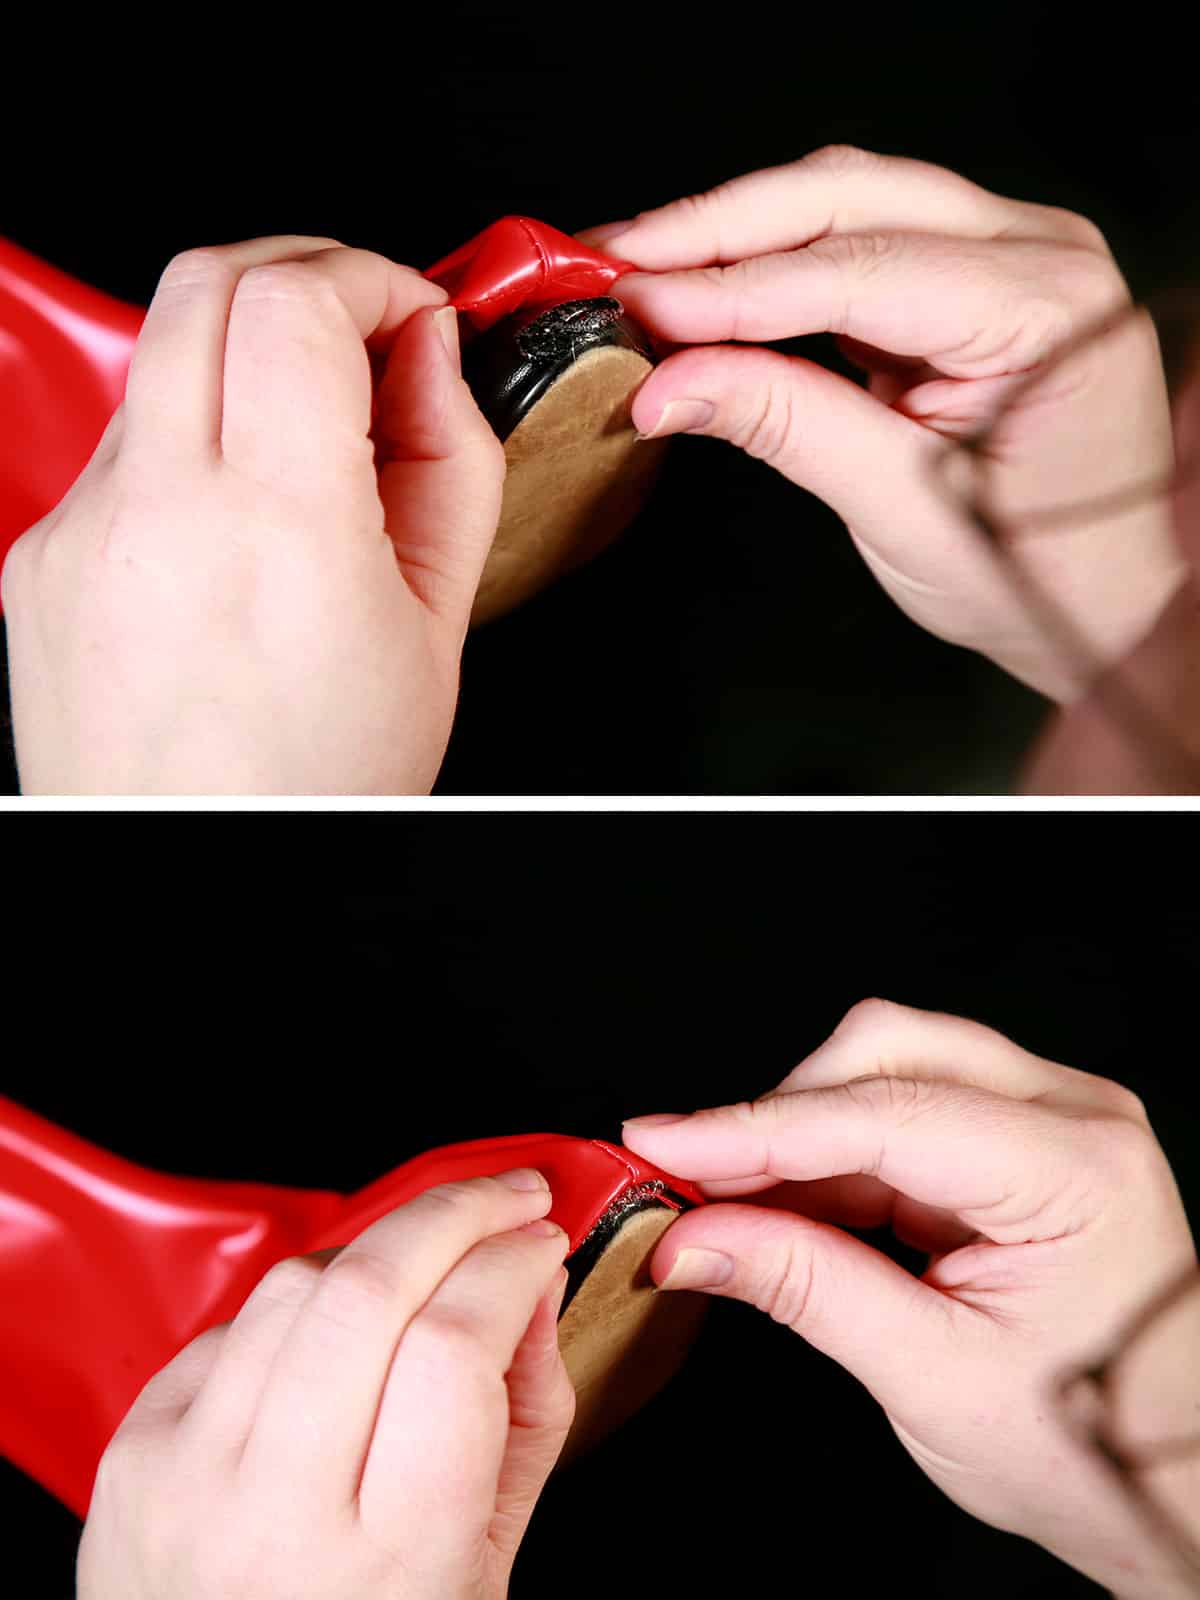 A two part compilation image showing a shiny red boot cover being stretched over a black shoe and being glued into place.